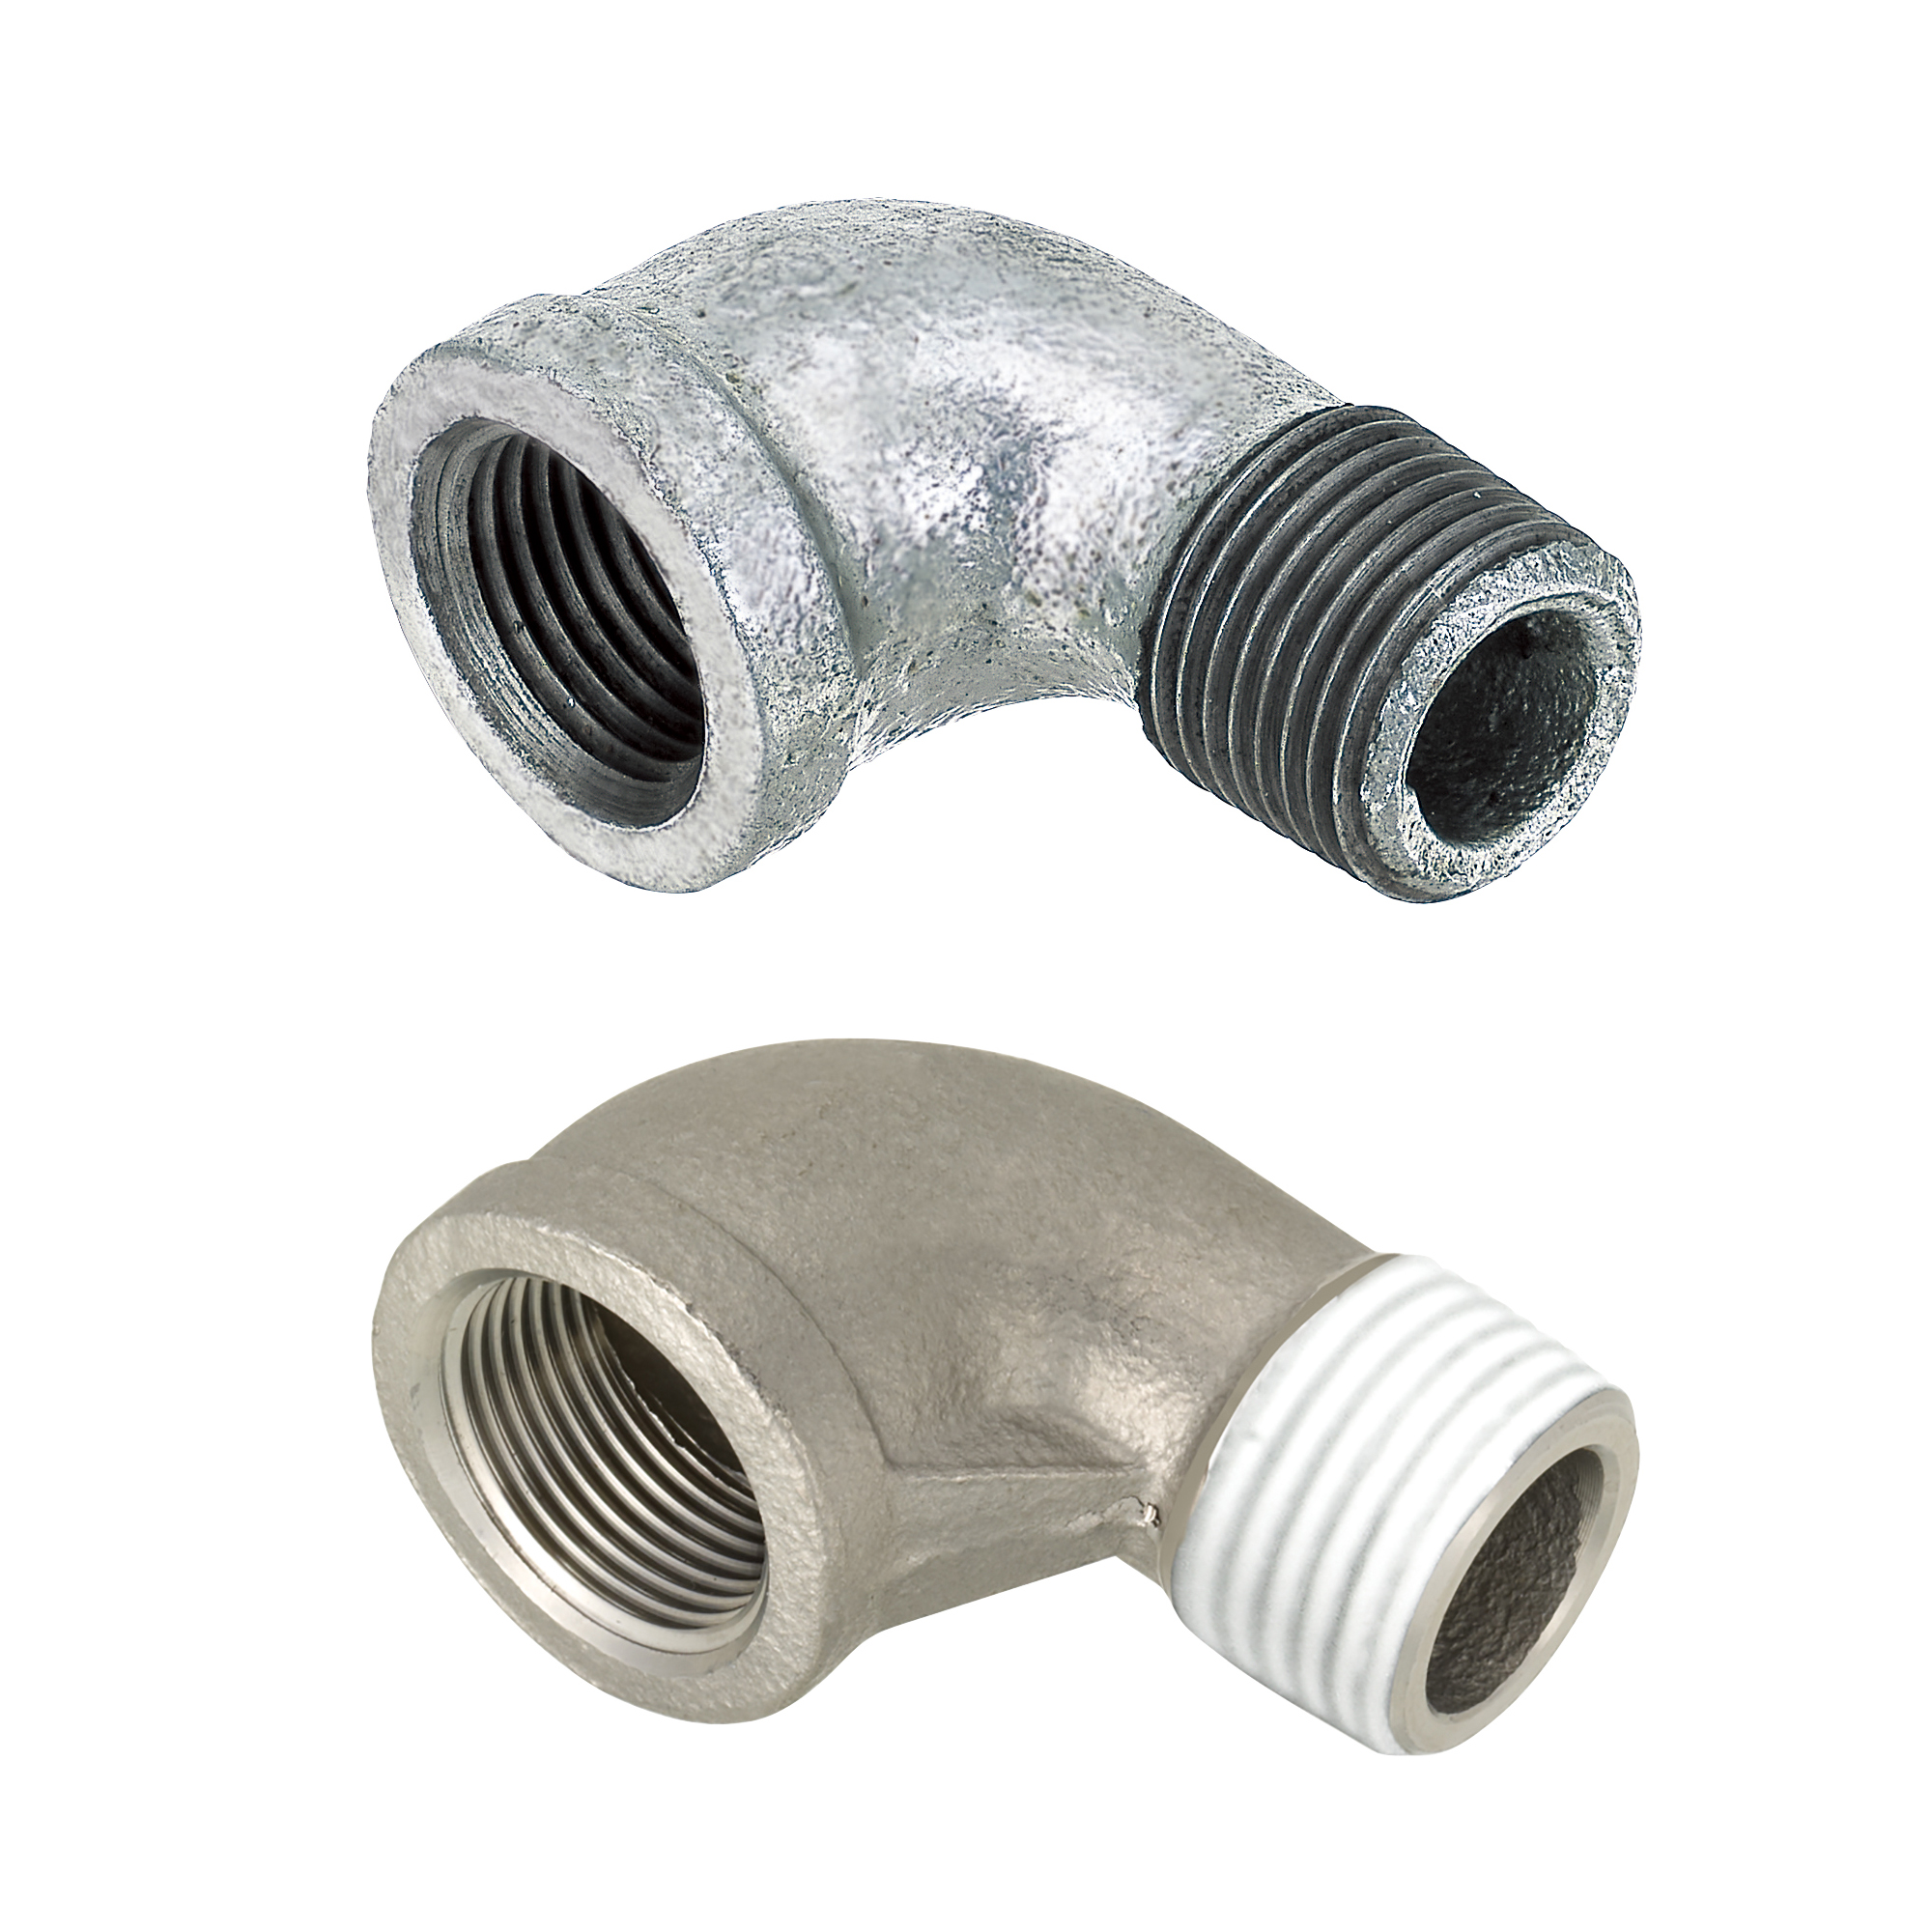 Low Pressure Fittings/90 Deg. Elbow/Threaded and Tapped (SGPPEL25A) 